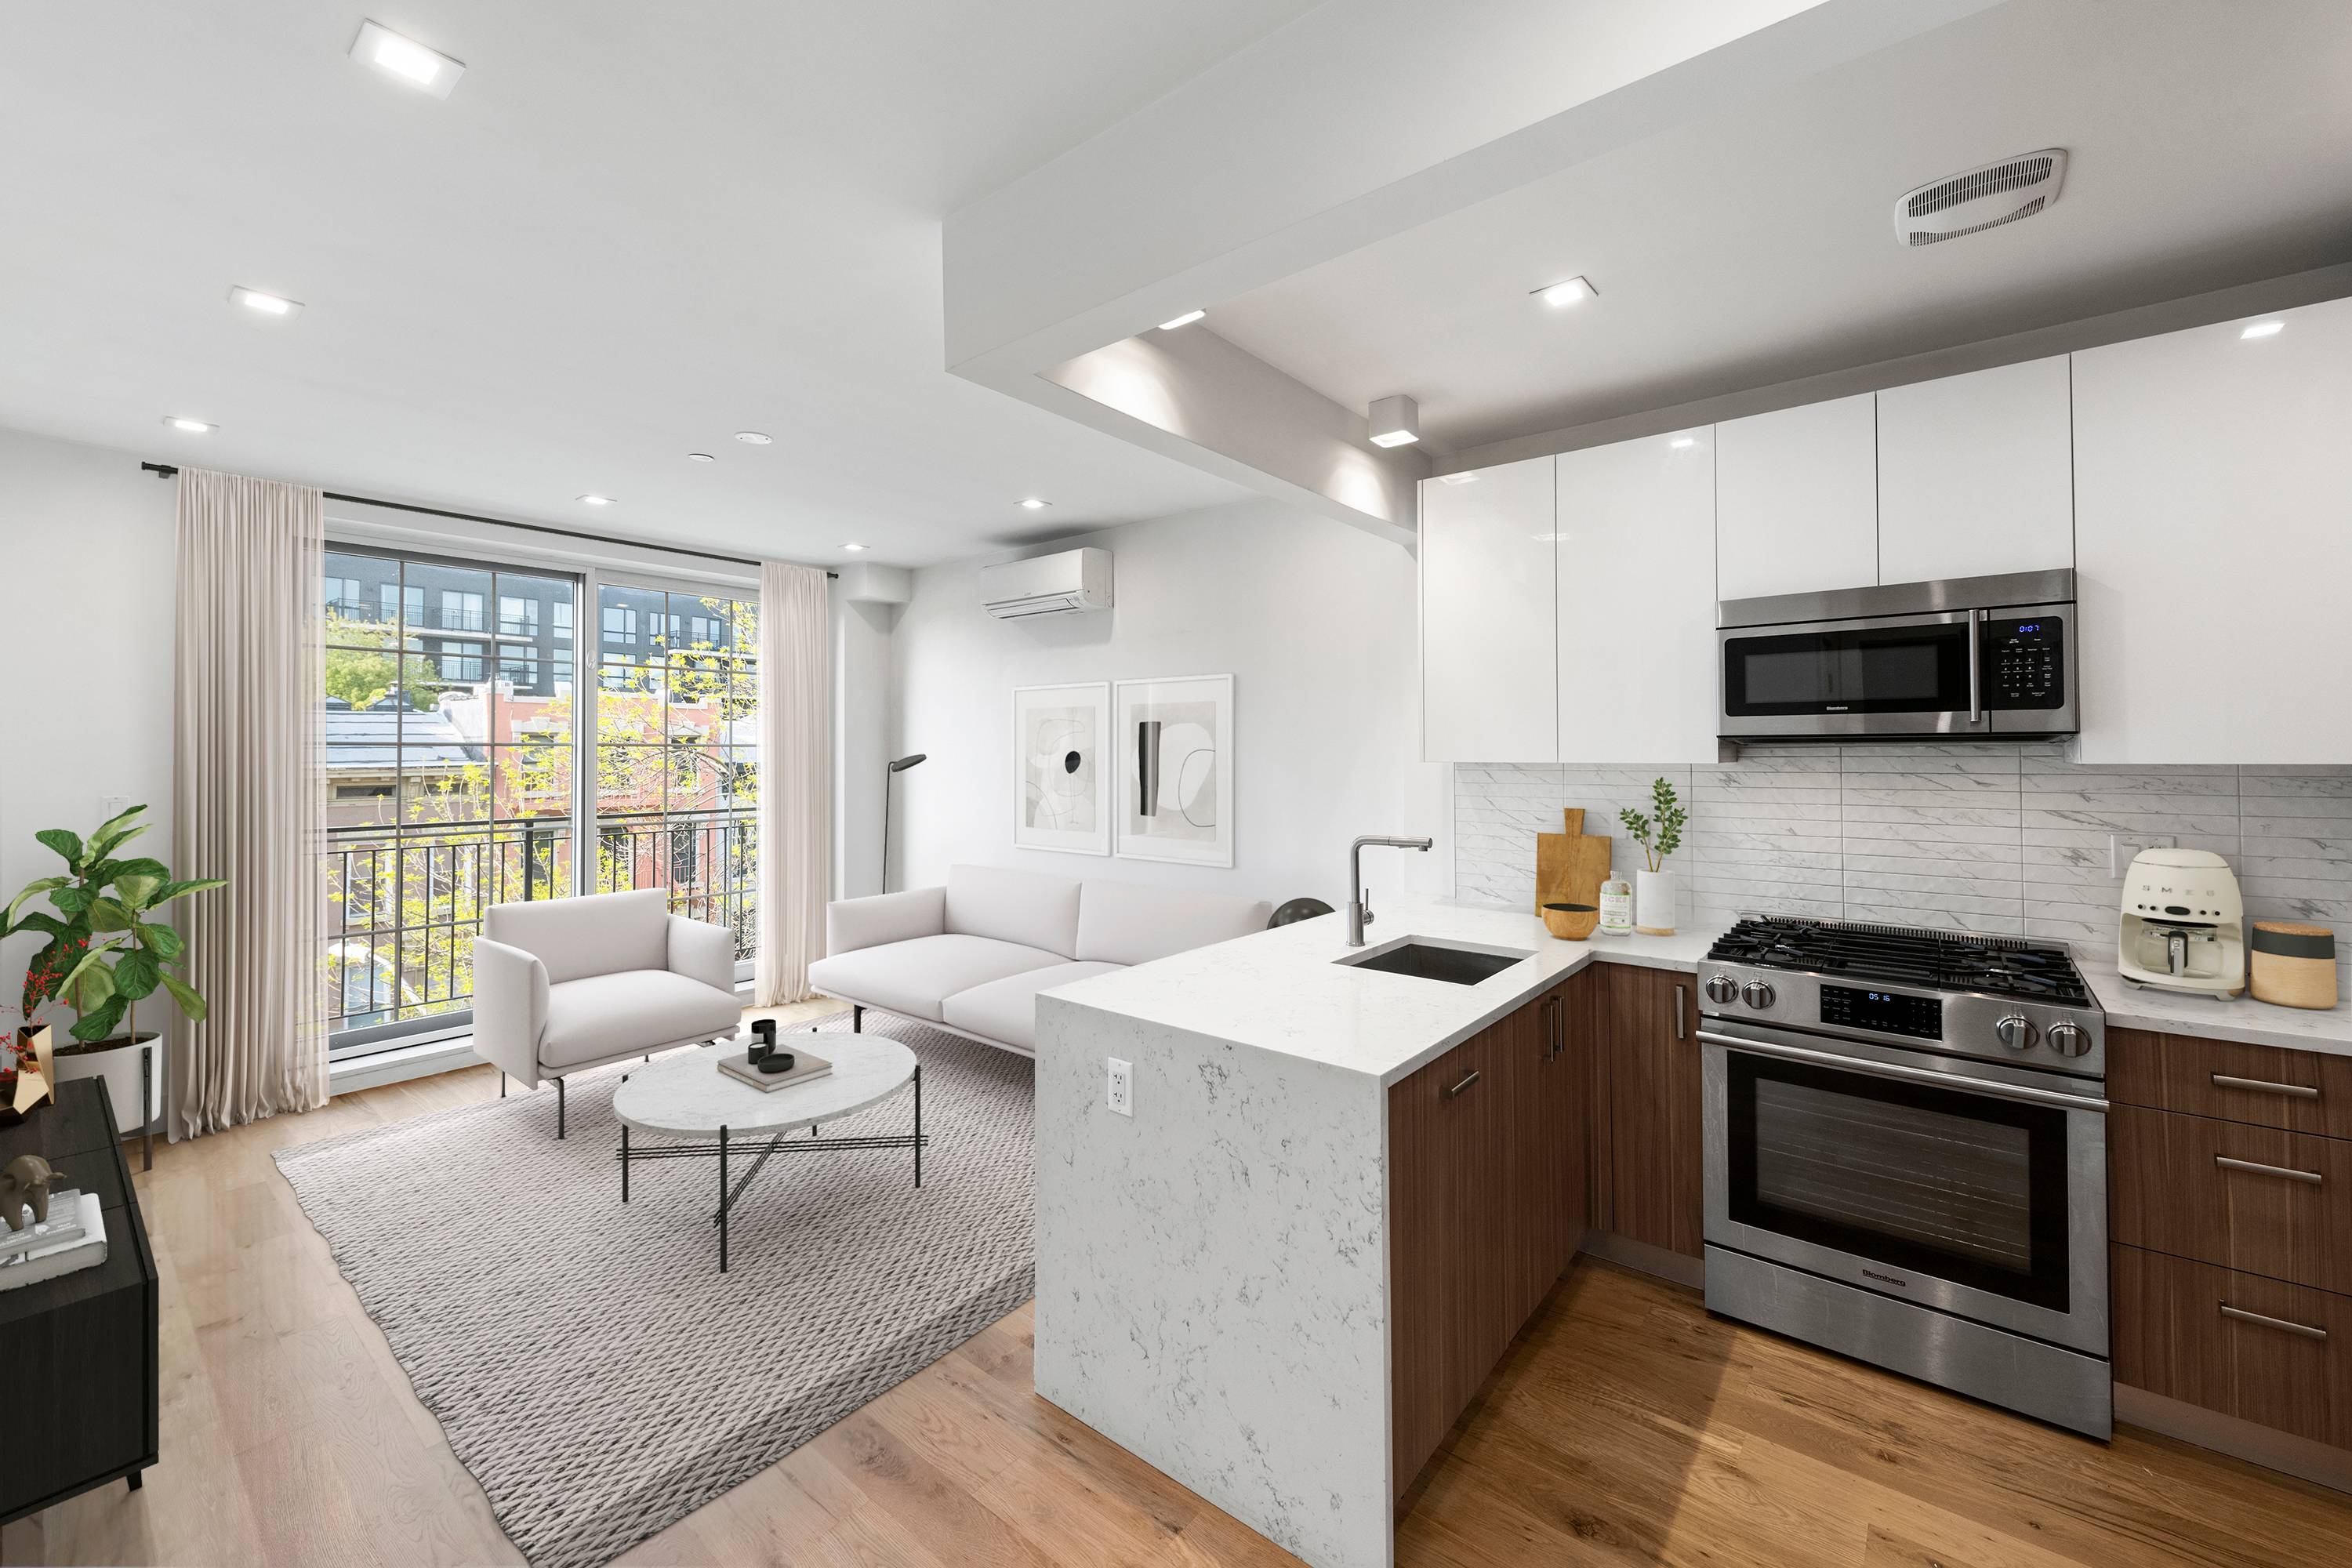 Upscale Living in the Heart of Trendy Brooklyn!